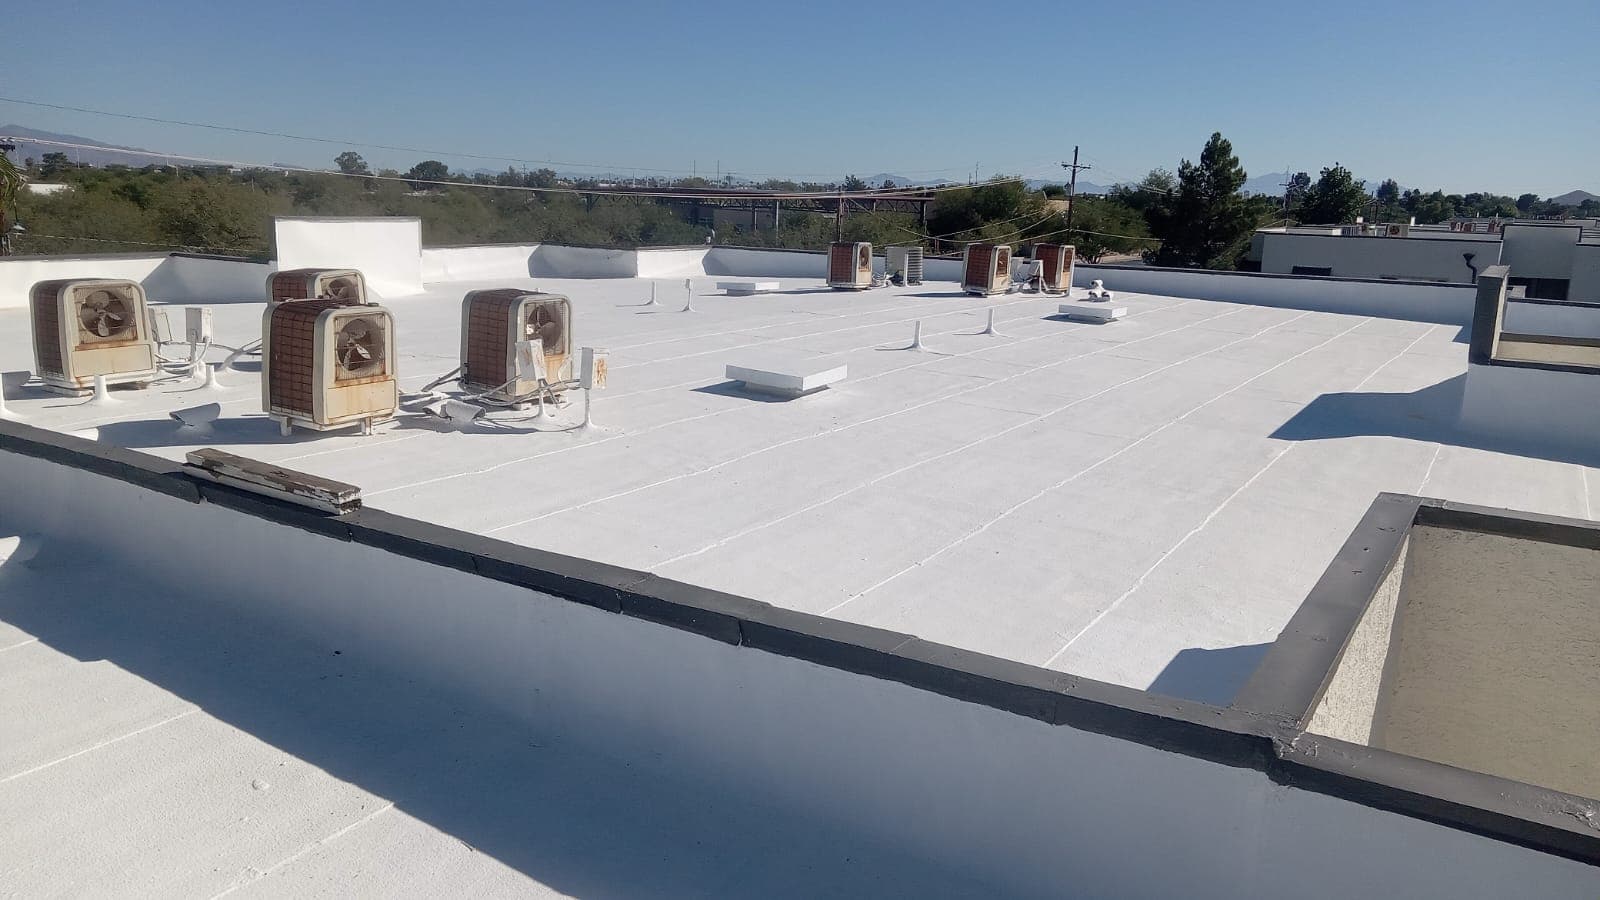 A panoramic view of a Chandler flat roof awaiting Behmer's touch, the foam surface primed for recoating.